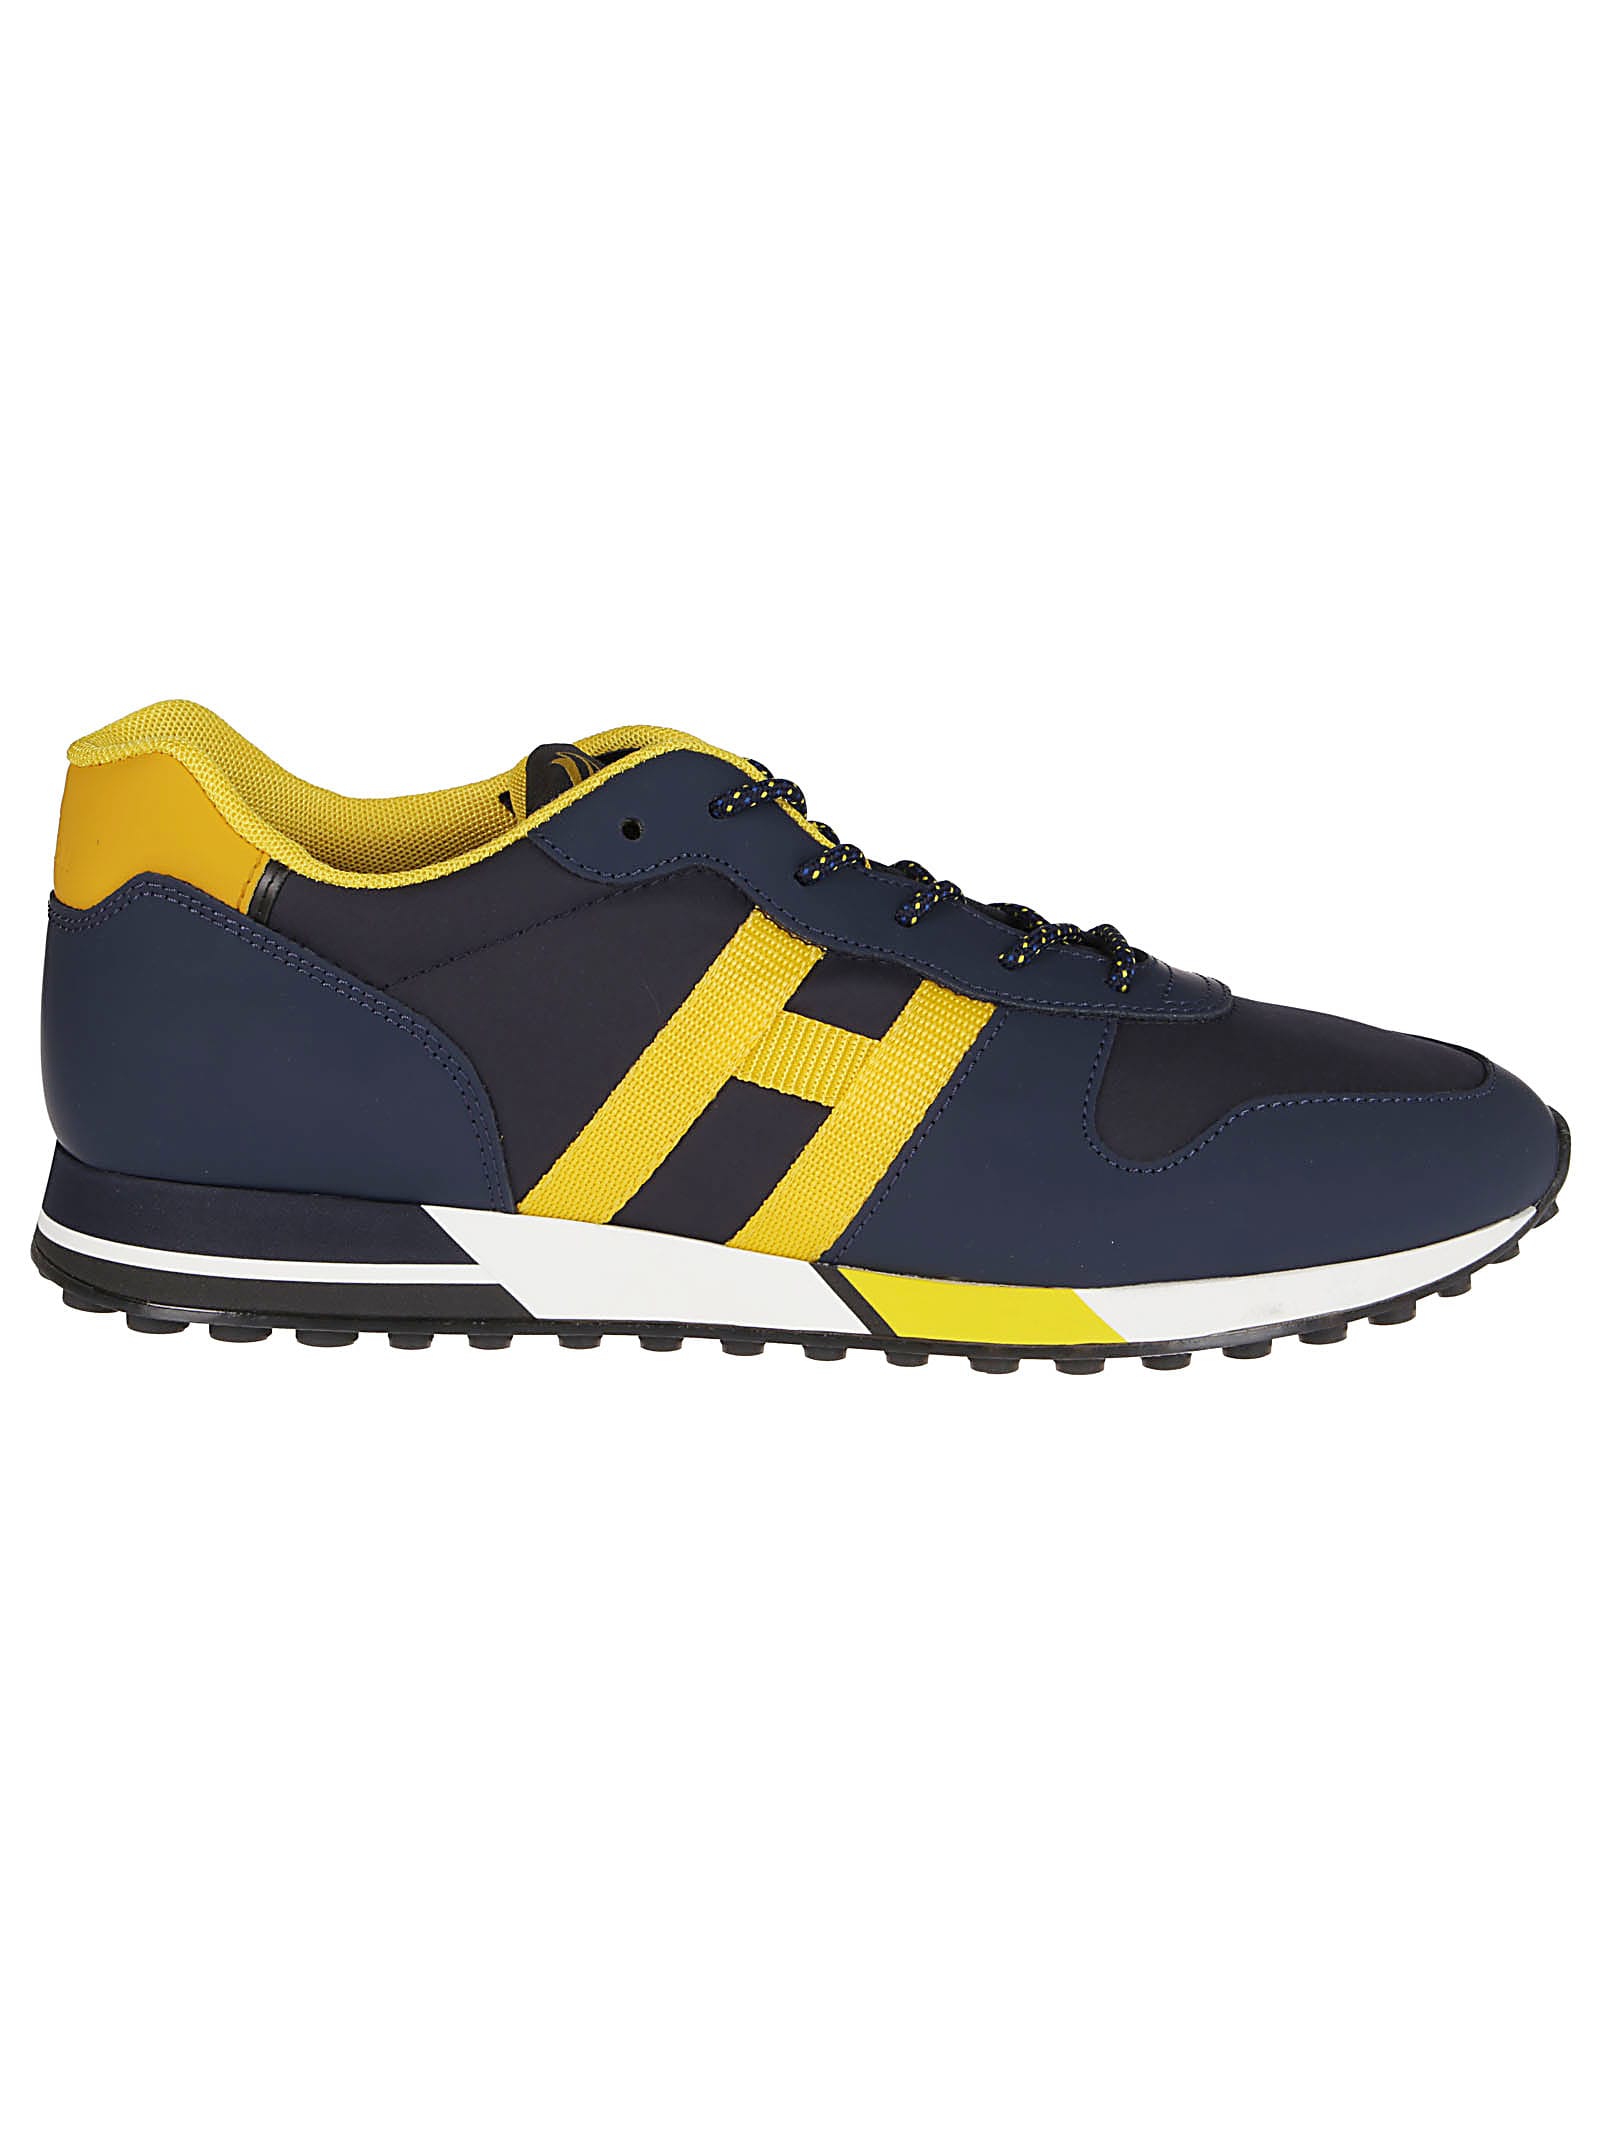 Hogan Blue And Yellow Leather H383 Sneakers